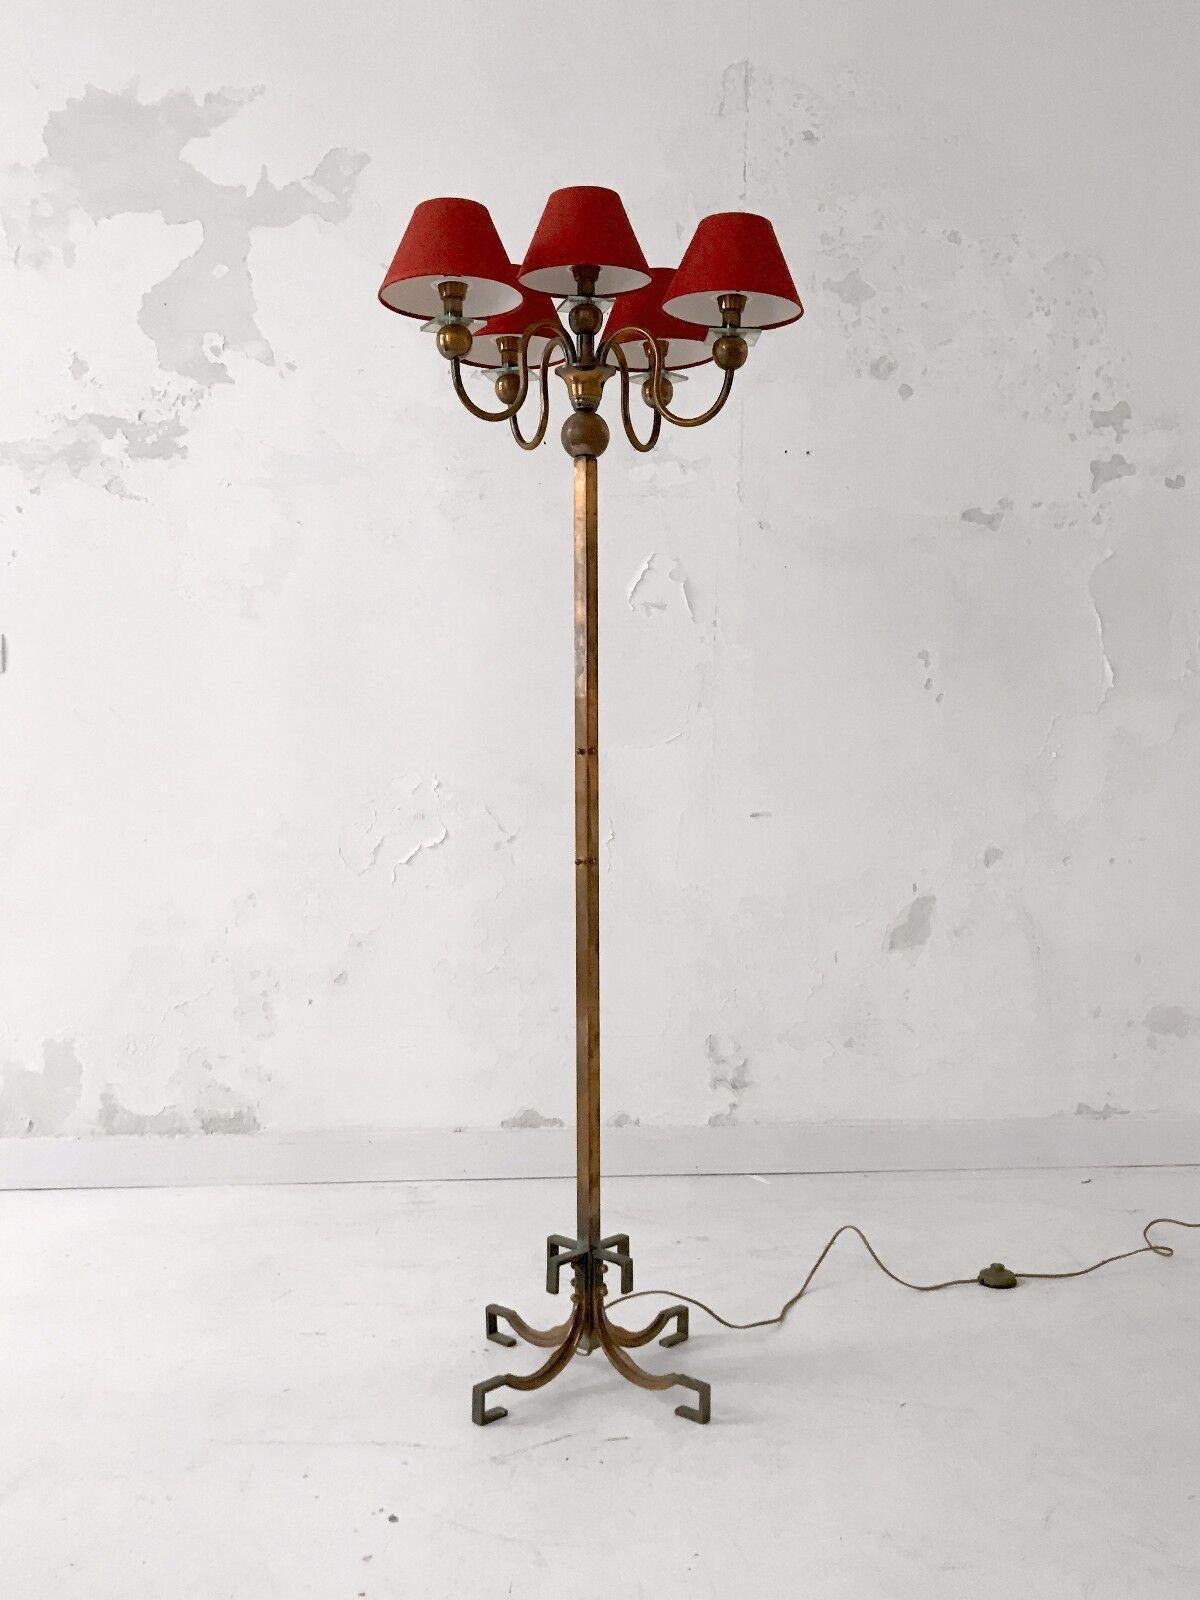 A NEO-CLASSICAL ART DECO MODERNIST Copper FLOOR LAMP by PETITOT, France 1930 For Sale 3